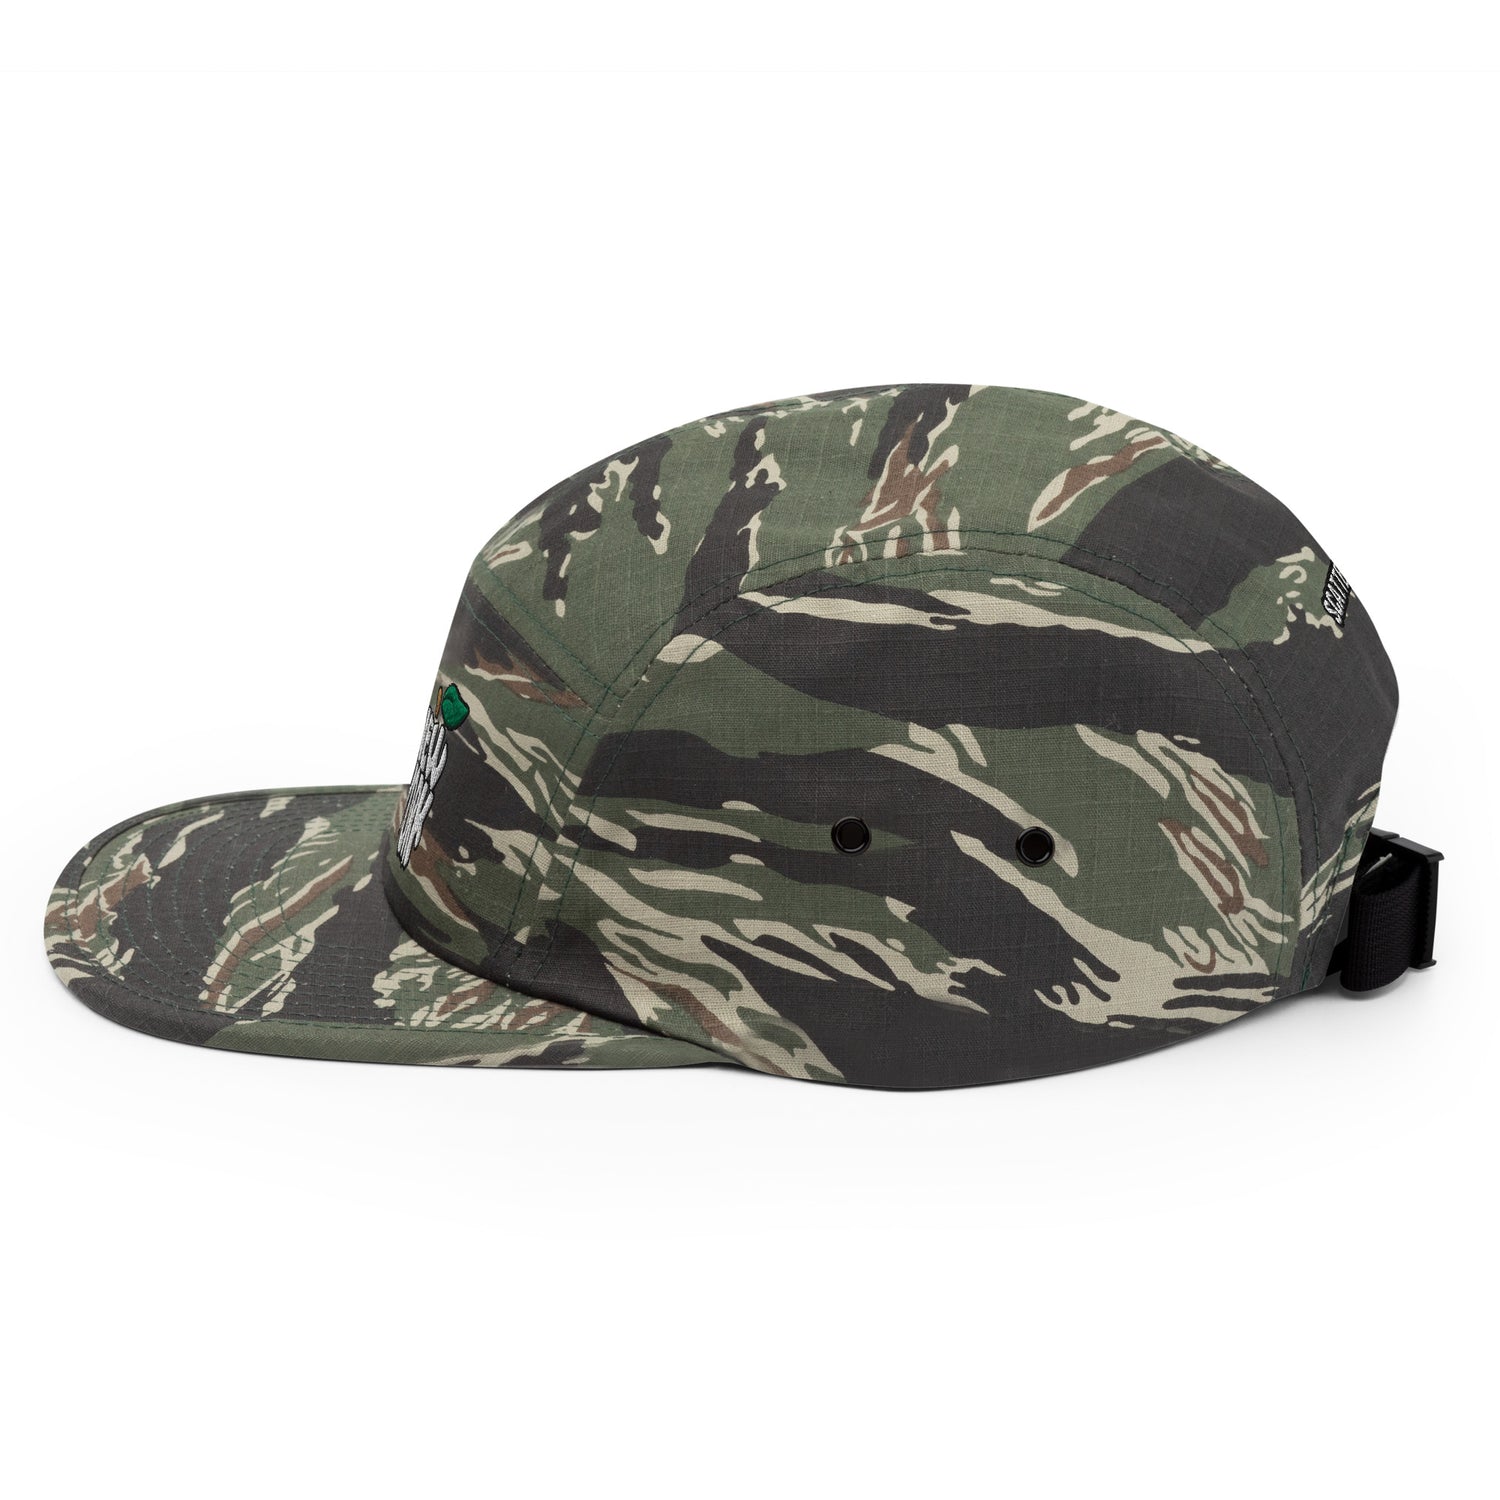 New York Apple Logo Embroidered Tiger Camo Five Panel Hat Scattered Streetwear